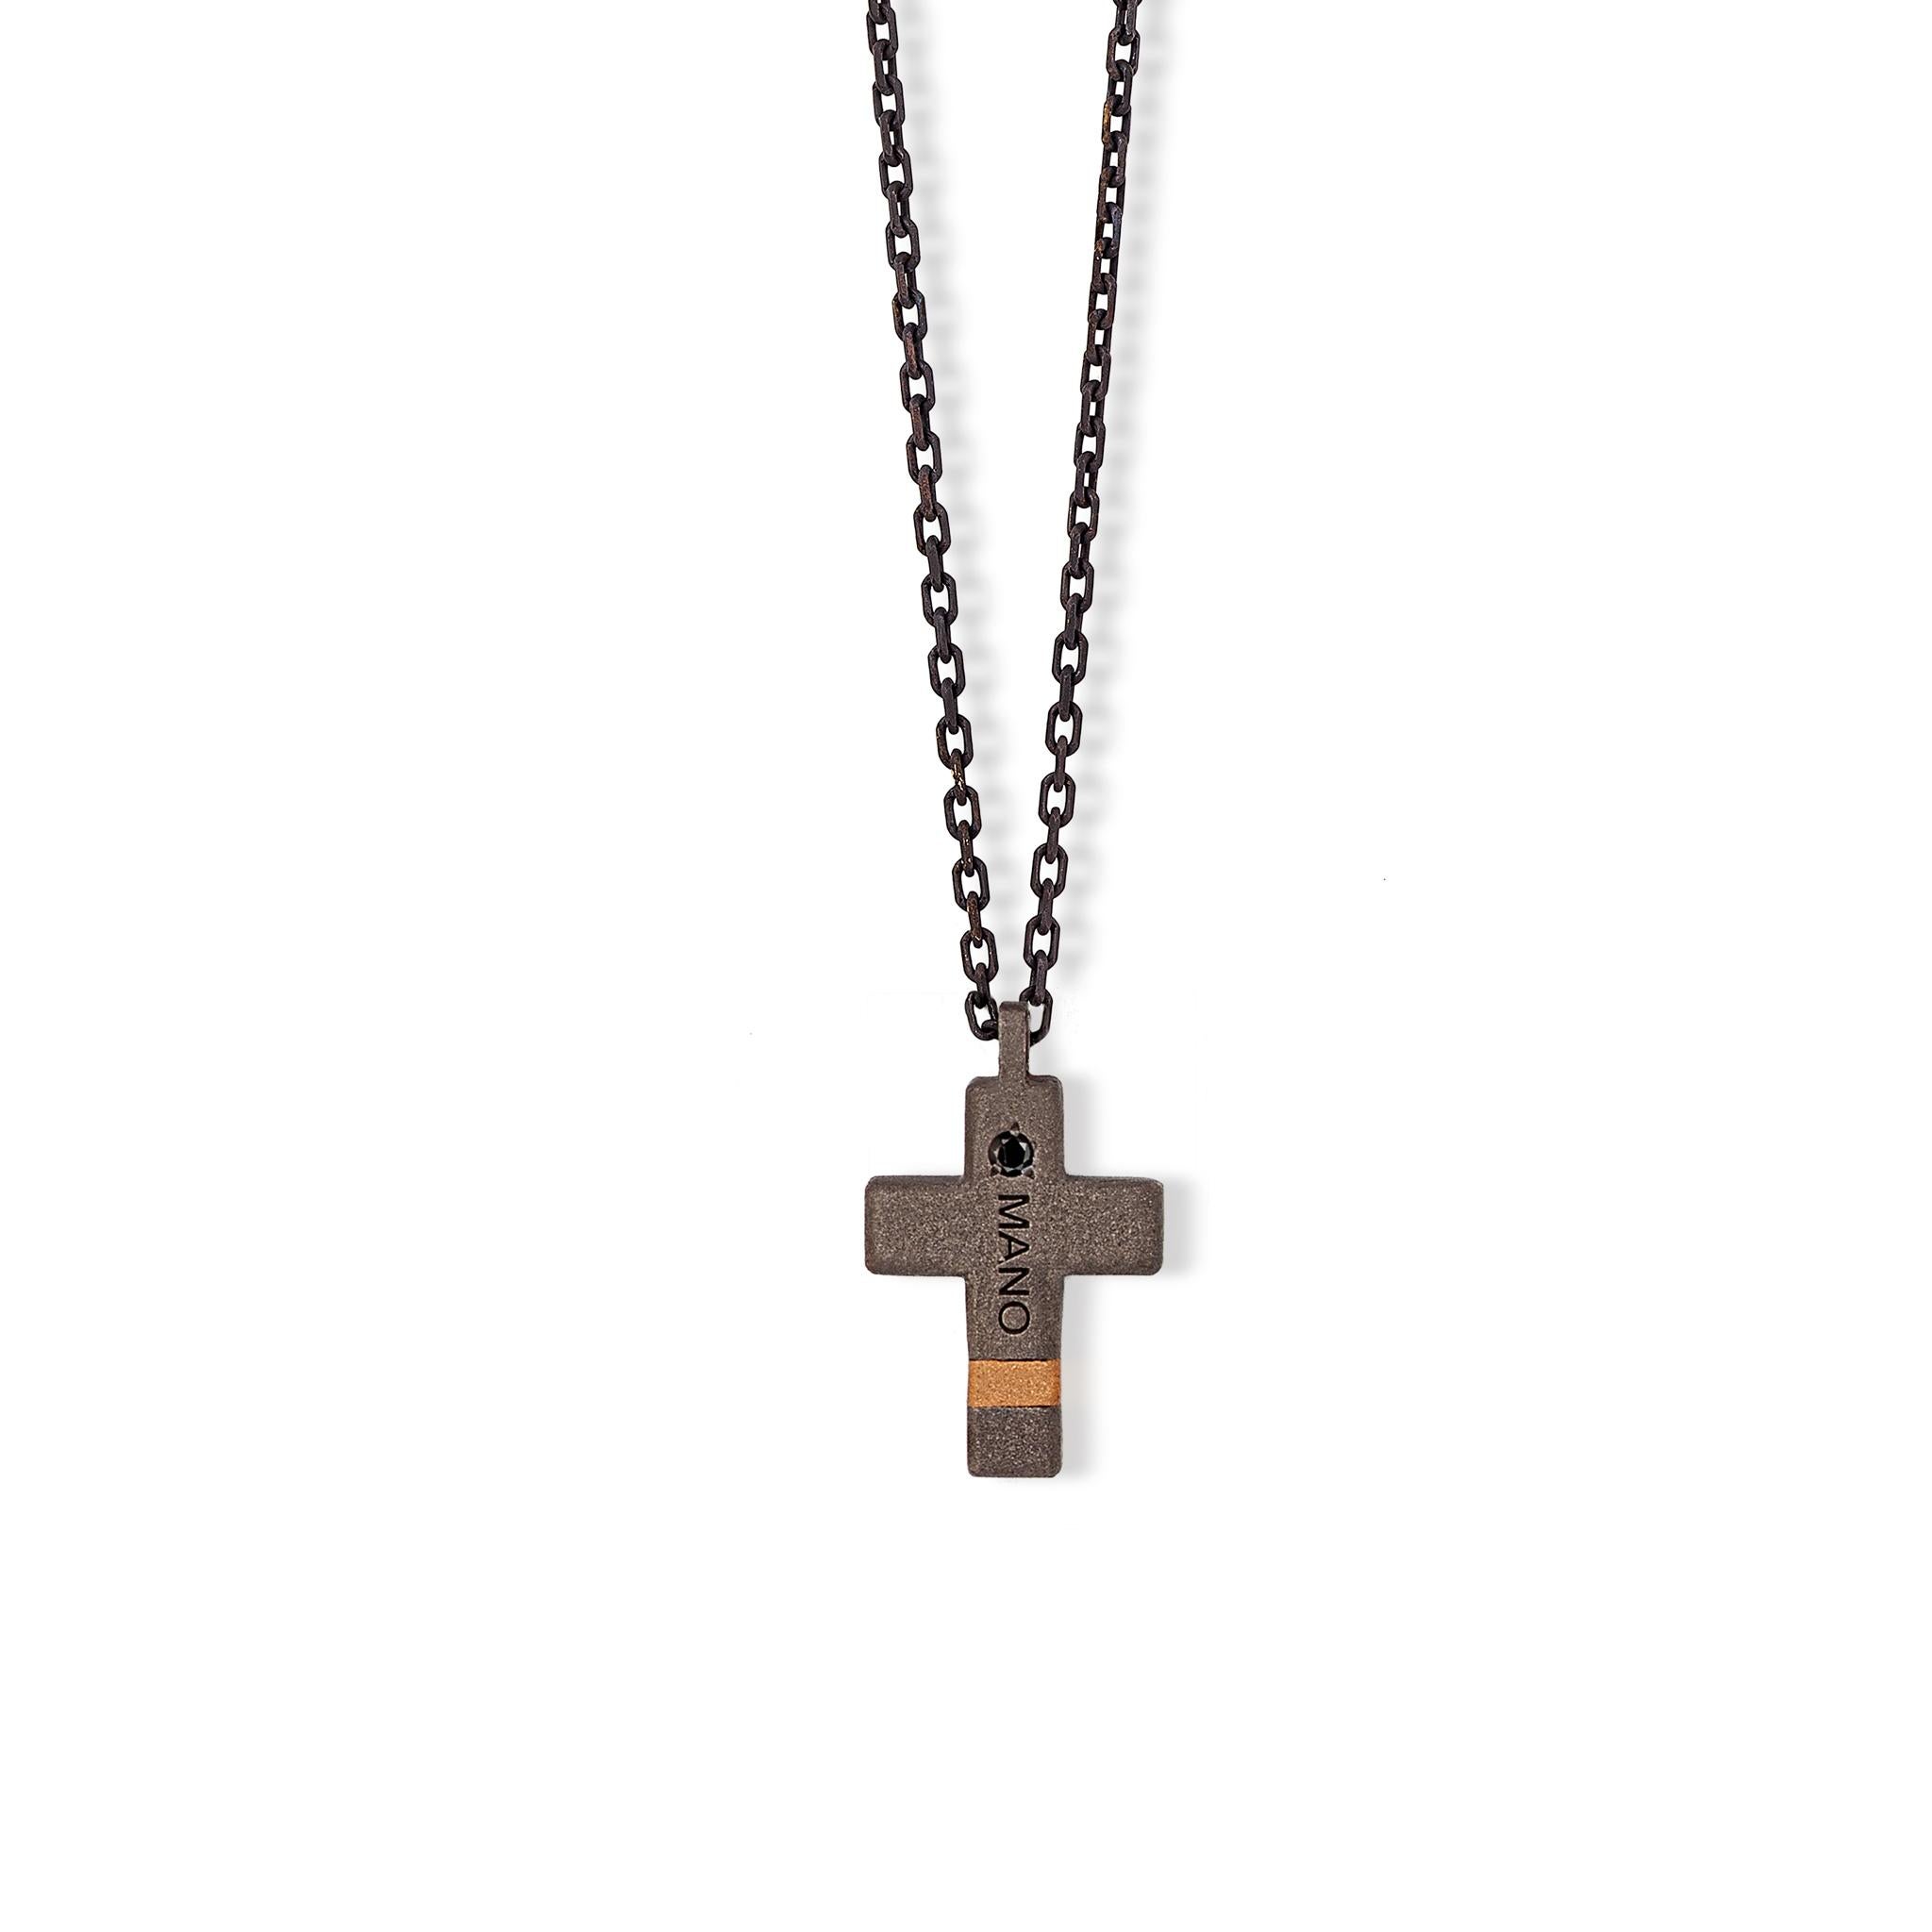 Men's necklace made of titanium, black diamonds and 18 kt red gold, 9 kt red gold and chain. Alongside the titanium, this cross features an 18 kt red gold insert as an element of preciousness. 10 black diamonds, equal to a carat of 10 points, cover